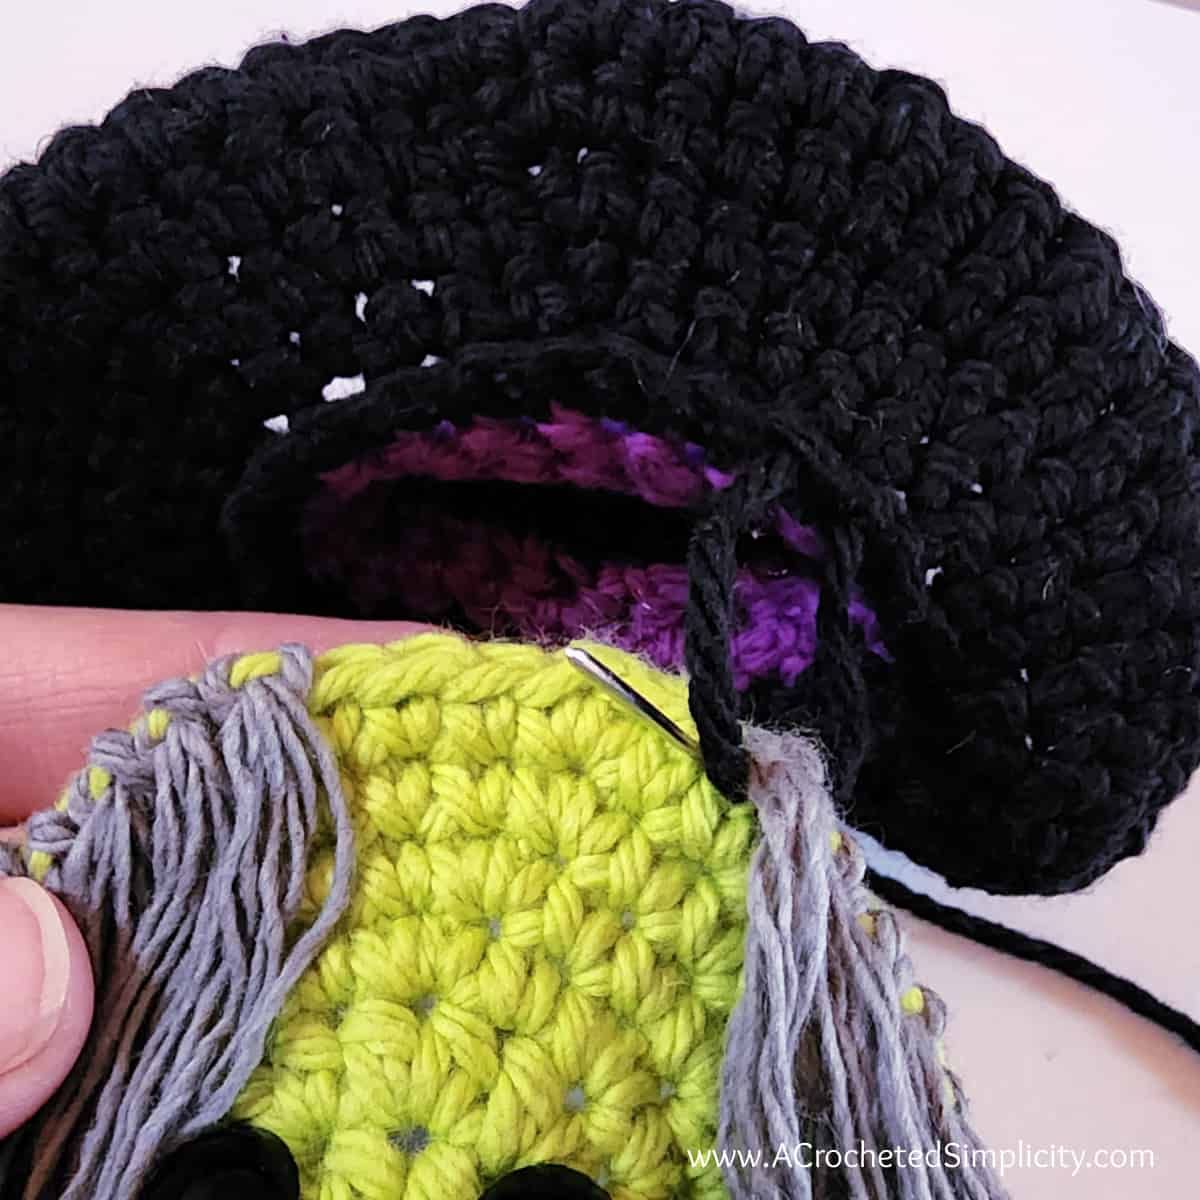 Yarn needle and tail of yarn attaching witch's hat to her head.